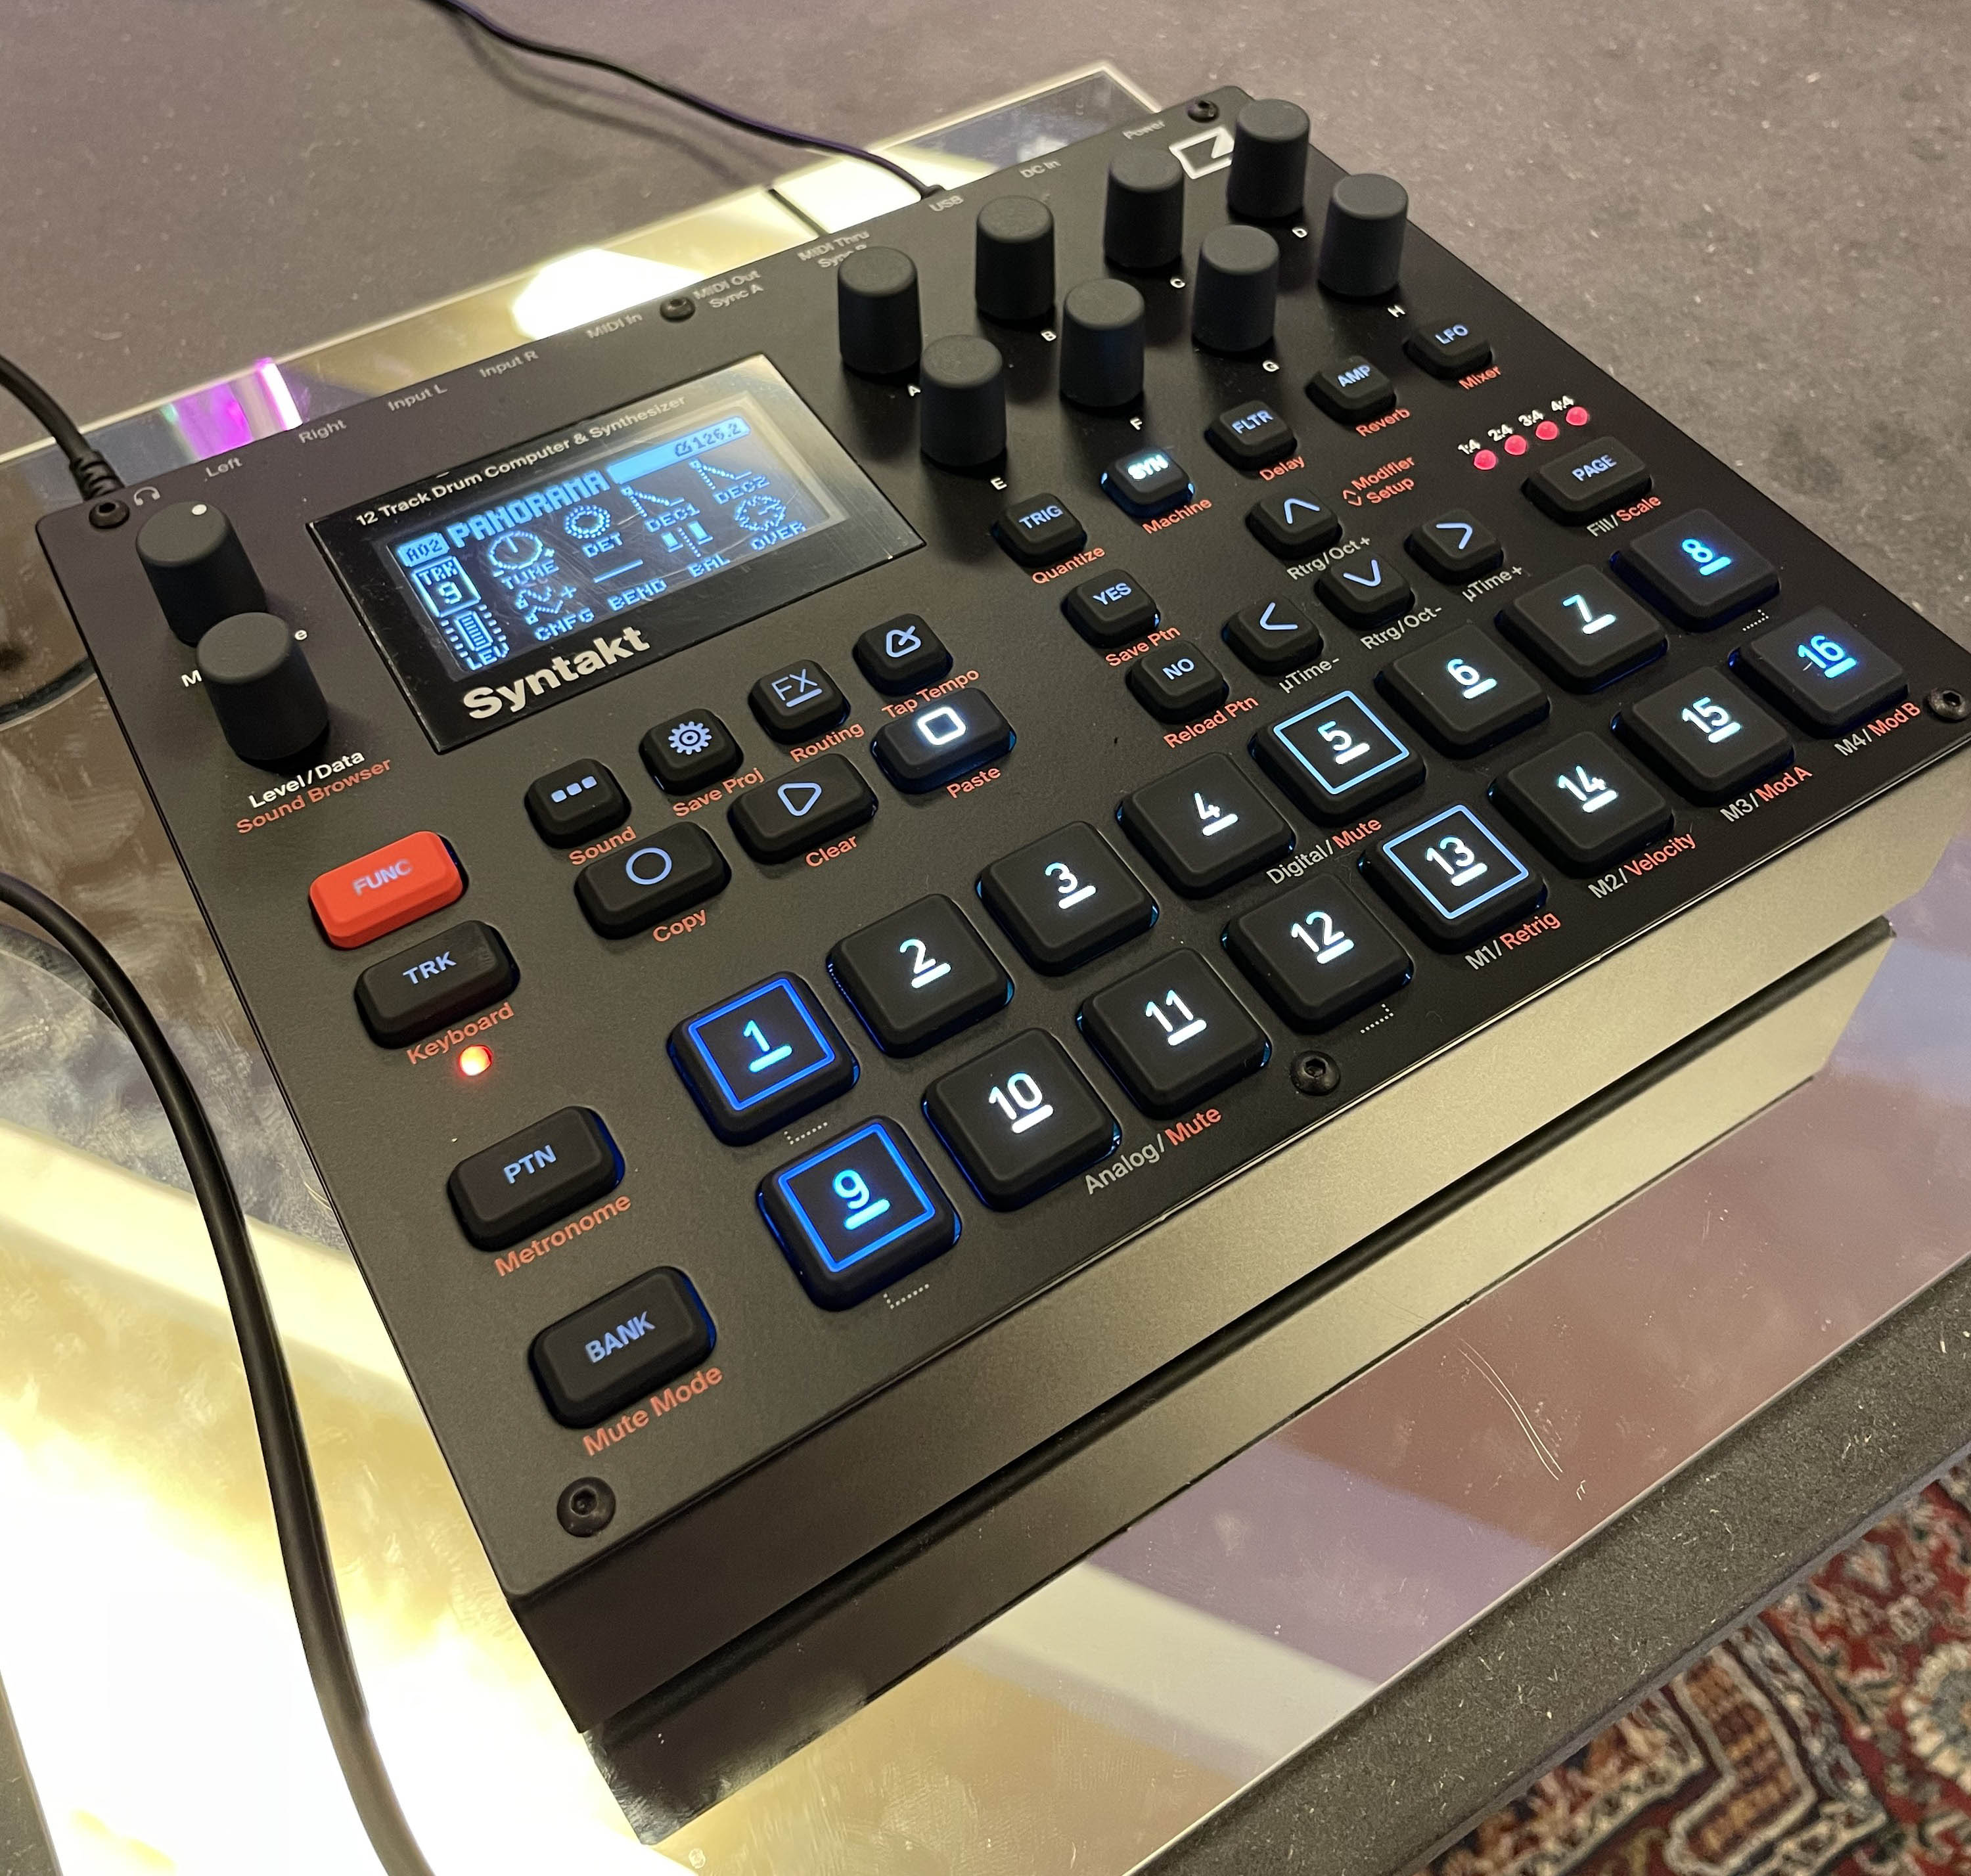 superbooth Elektron’s latest fun-sized groovebox delivers all the instant sonic gratification we expected it might - capable of complex sequencing and some pretty impressive synthesis, this one is a definite all-rounder, despite the lack of sampling capabilities.